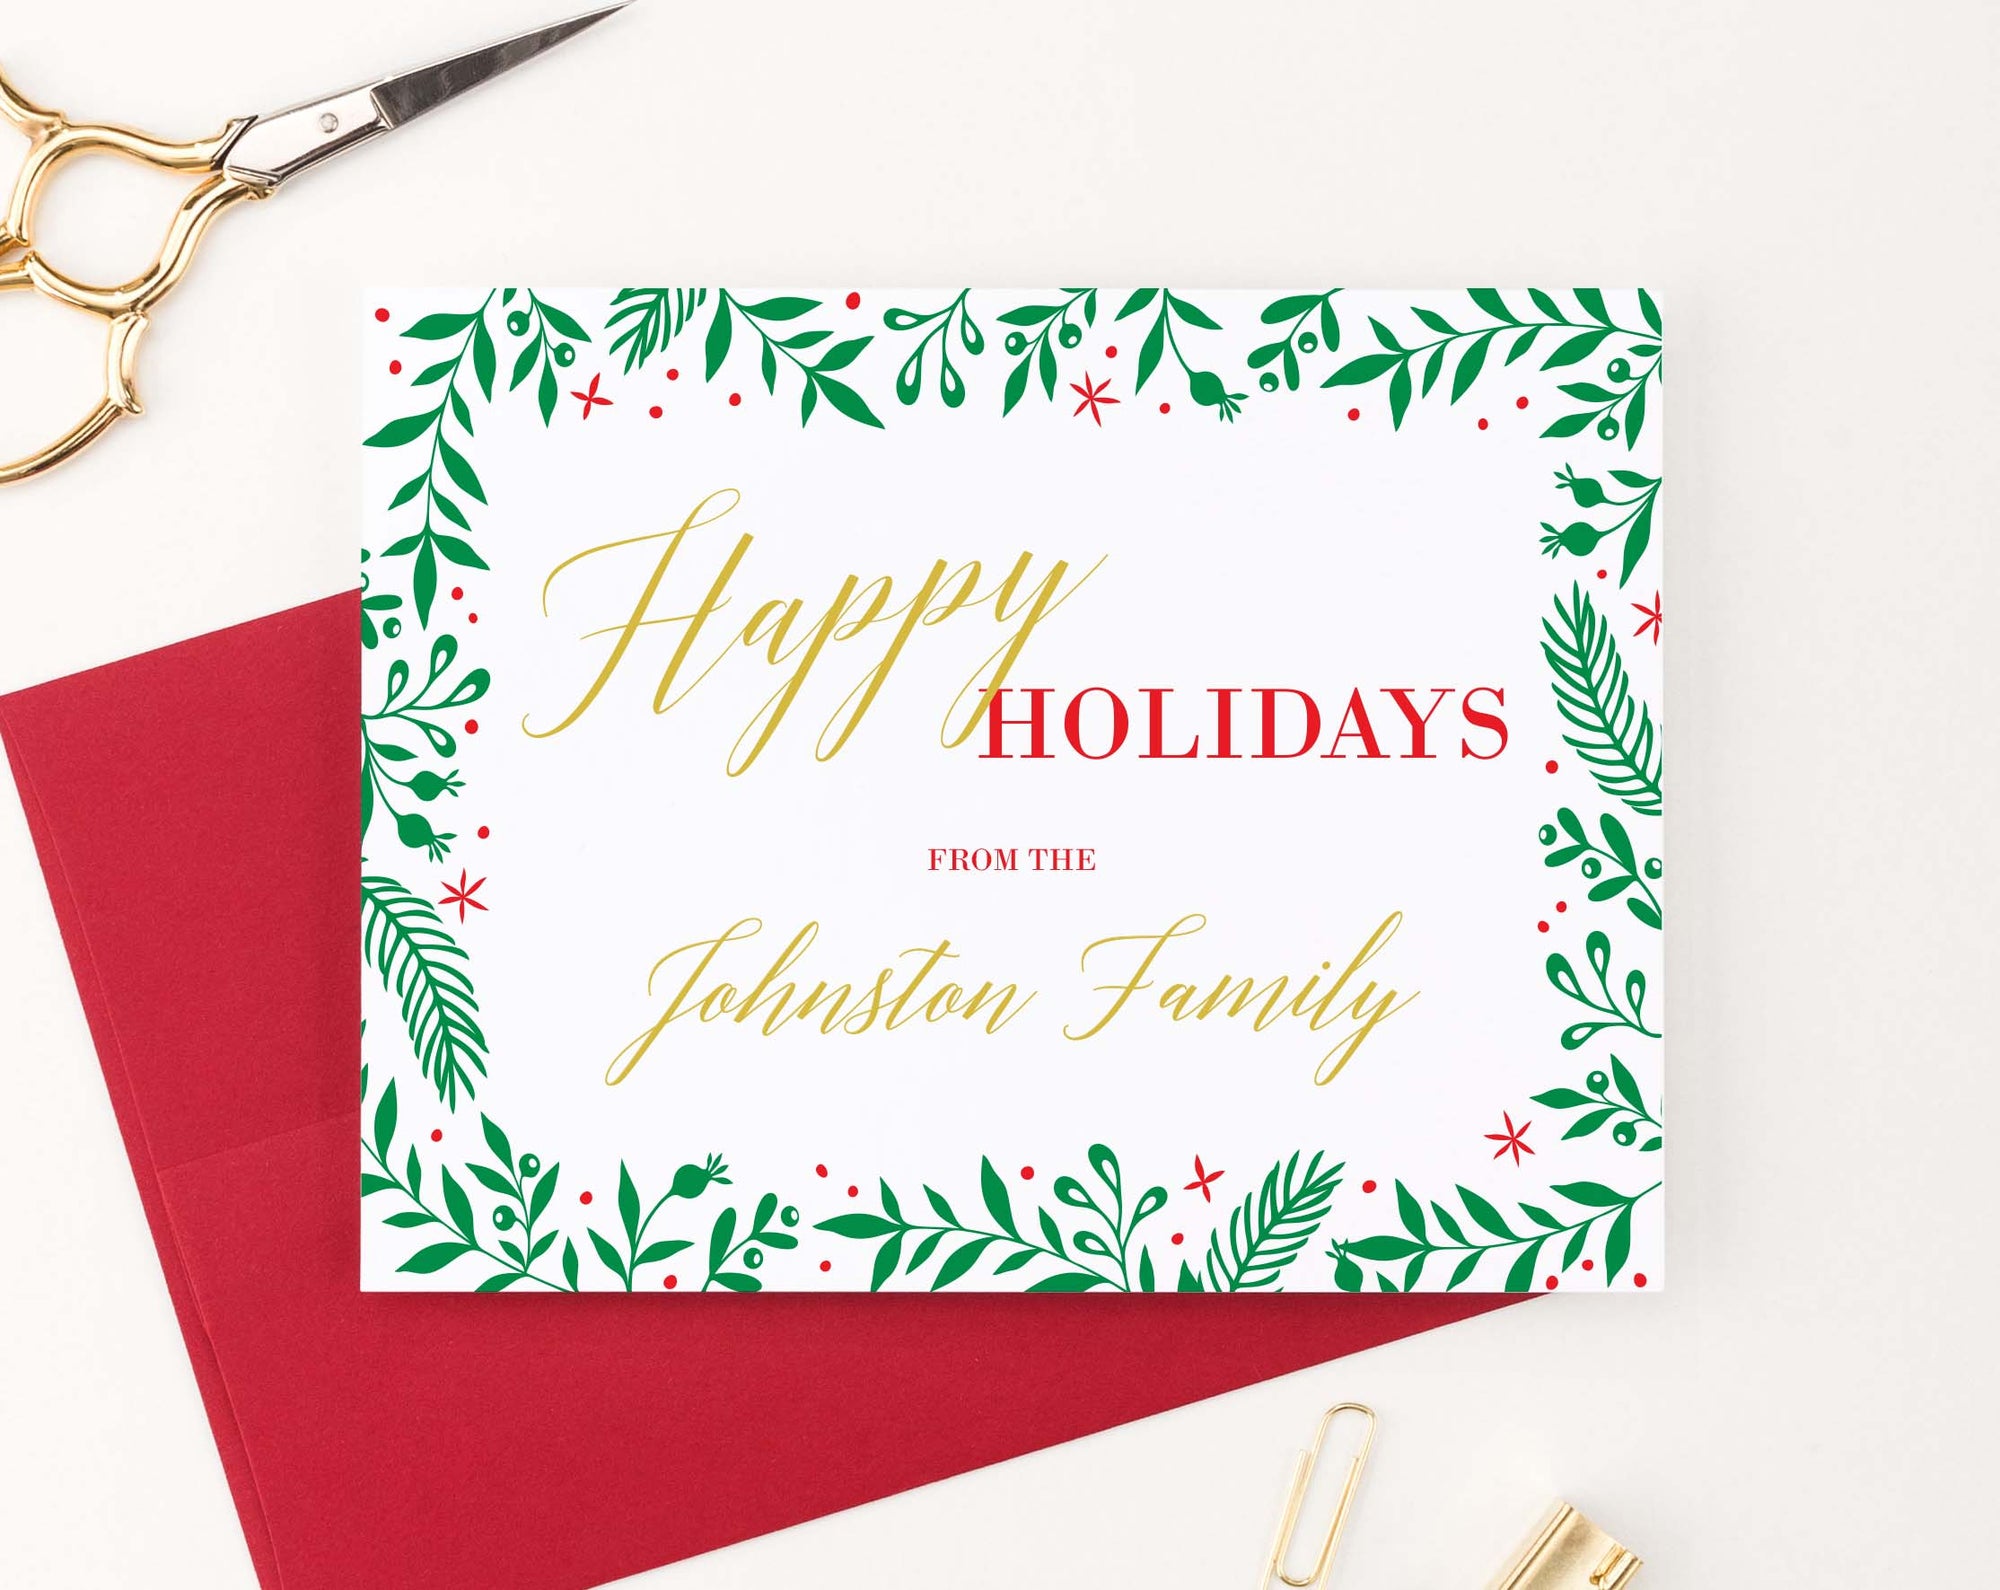 HGC005 red and gold personalizd christmas cards with holly border simple elegant